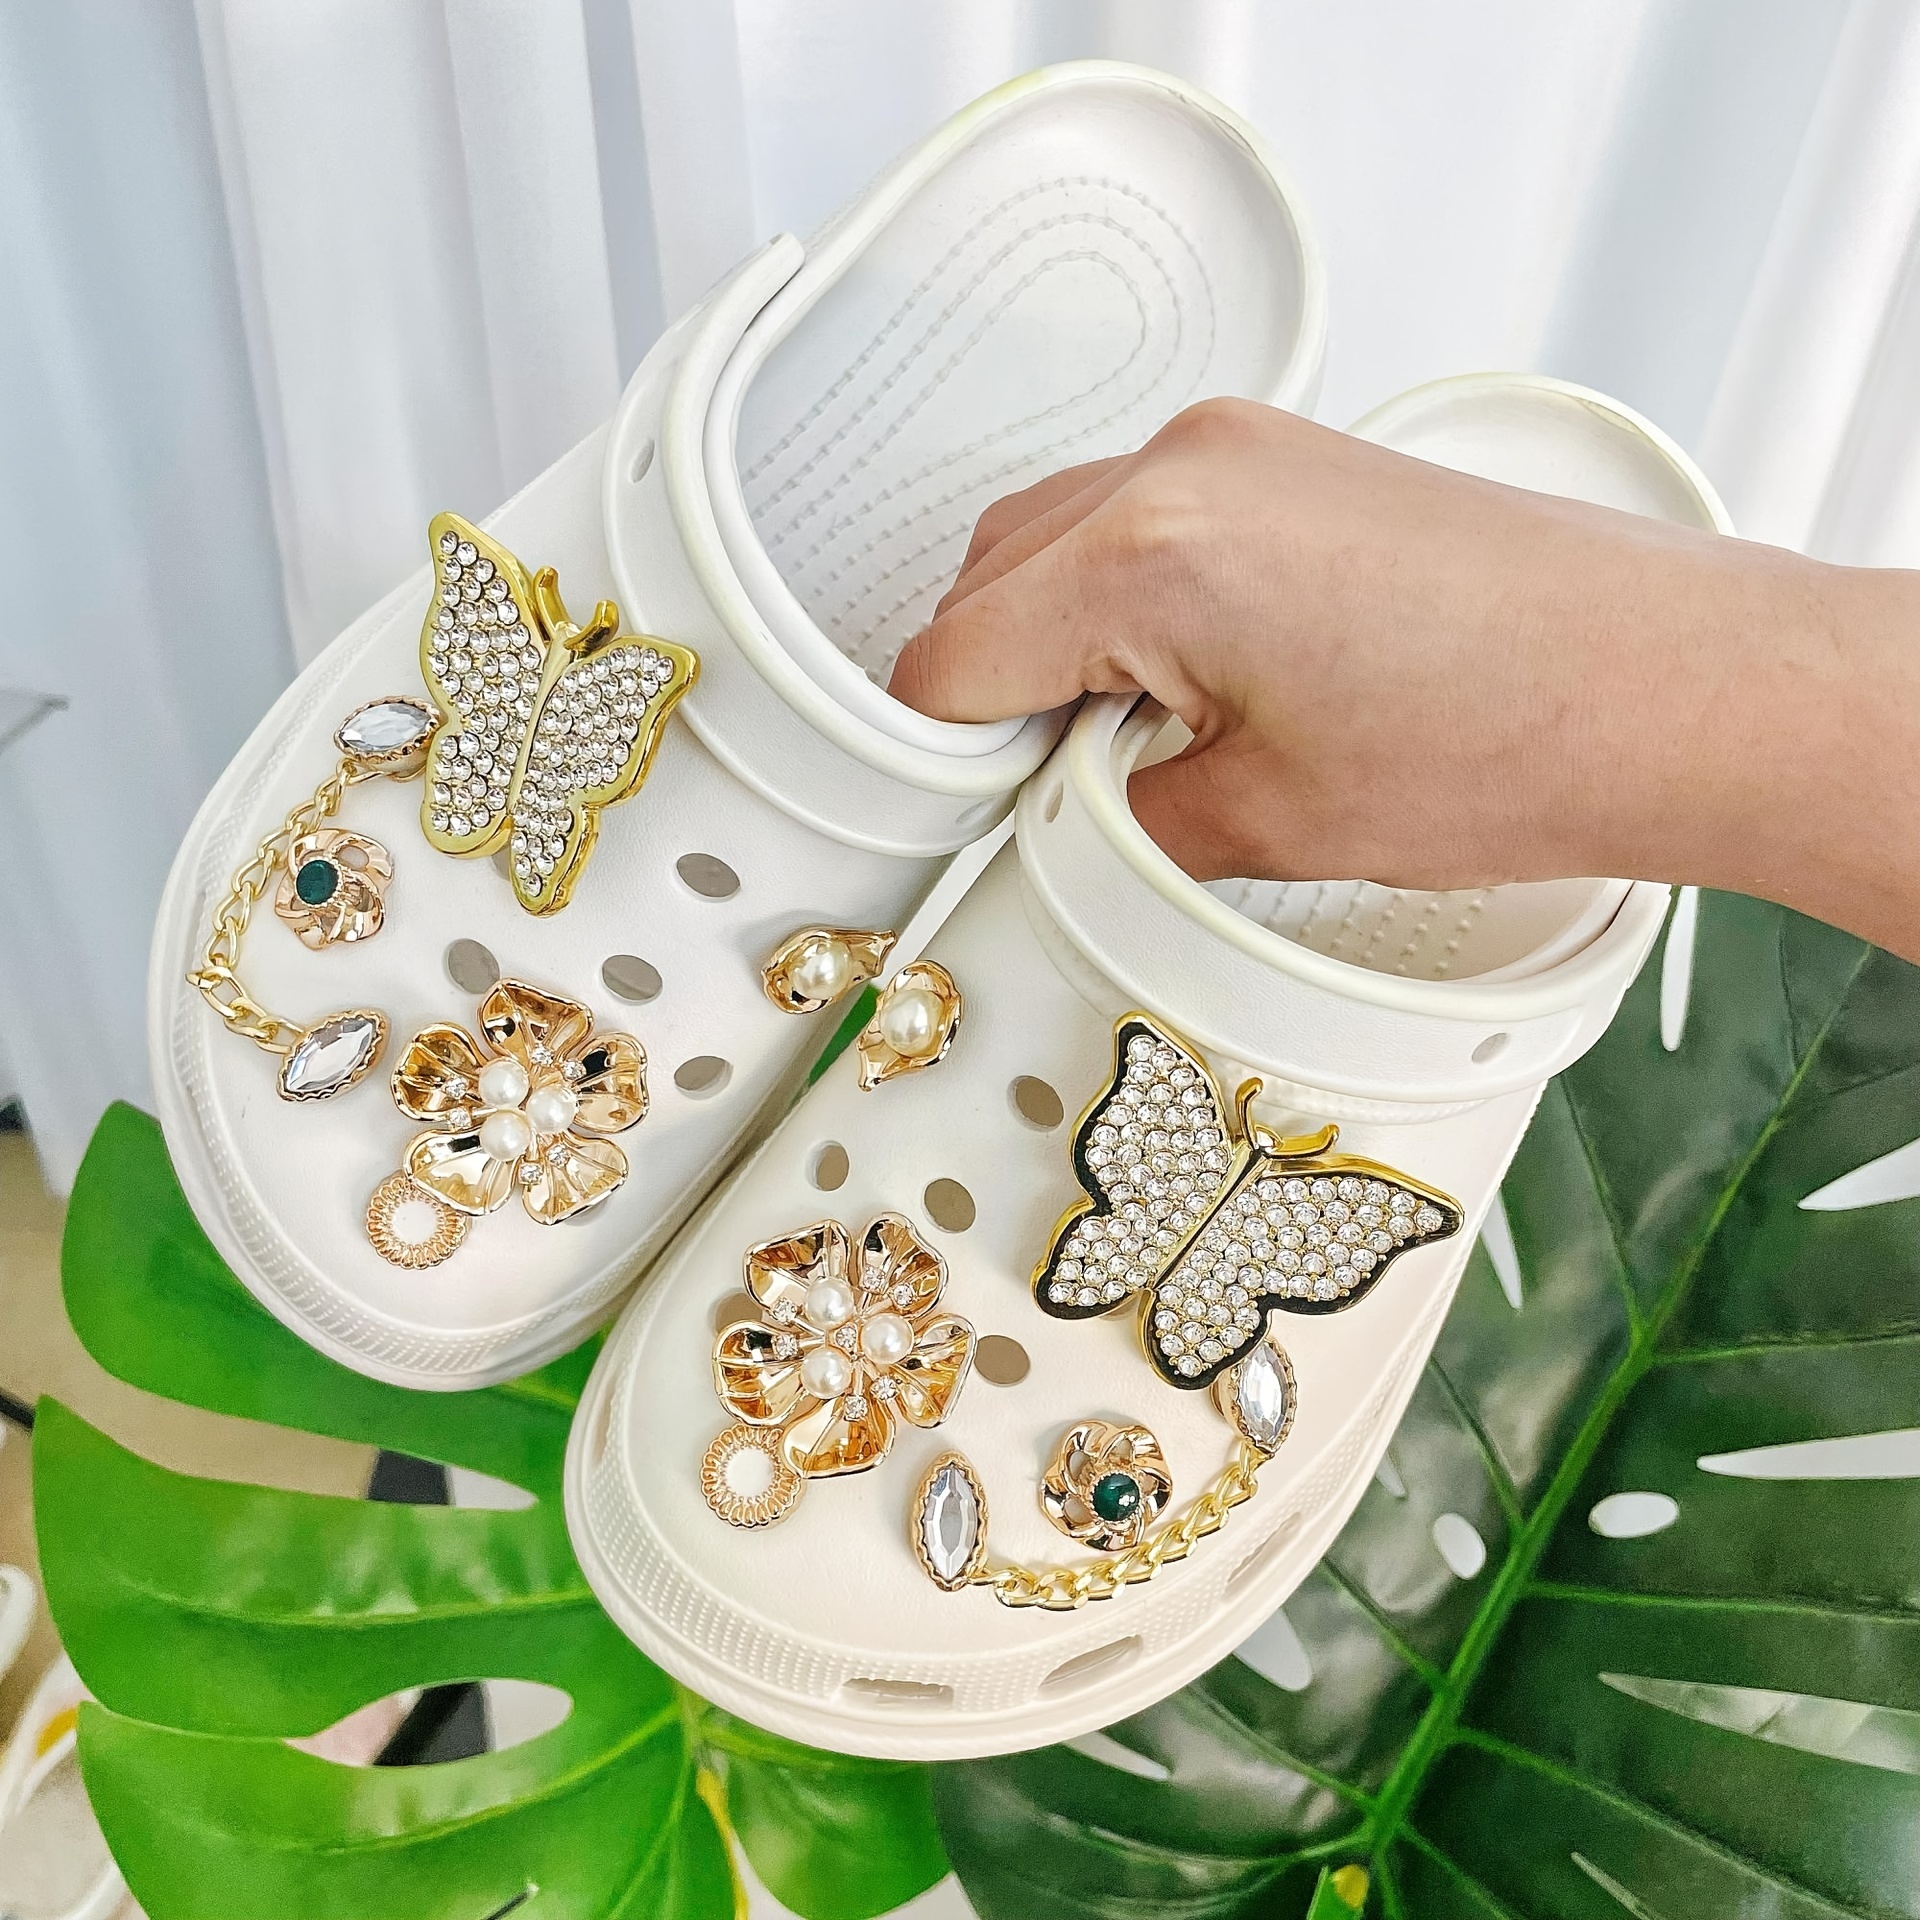 Shoe Bling Crystal Diamond Croc Clog Shoes Charms Jewelry Decor Girls Gift